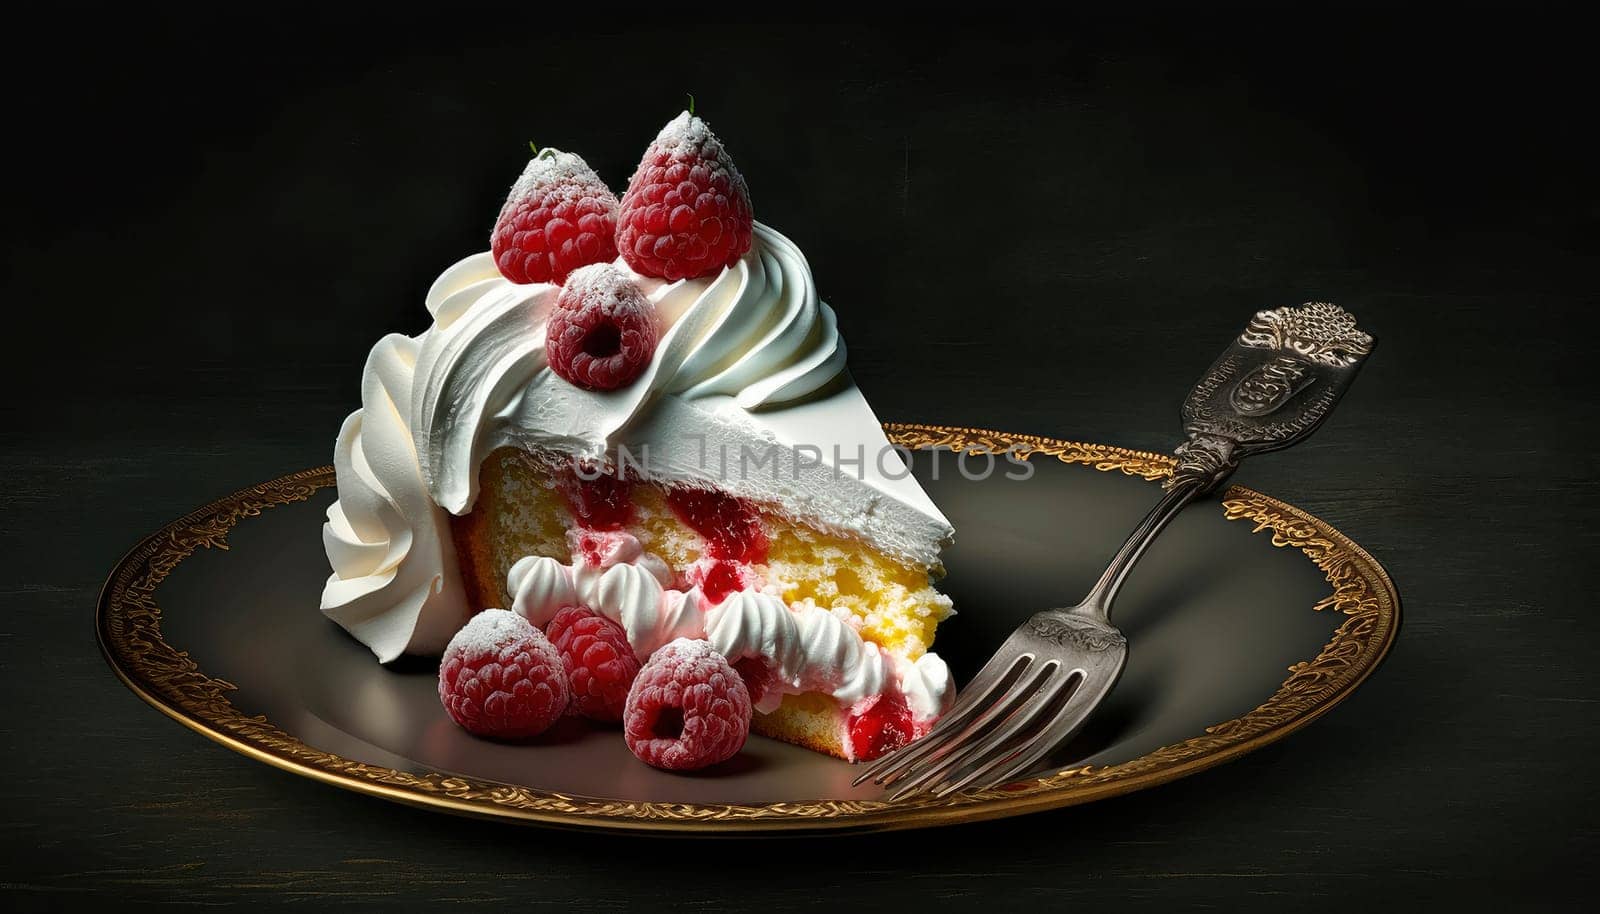 a piece of cake with whipped cream and raspberries on a plate on a dark background. by yanadjana